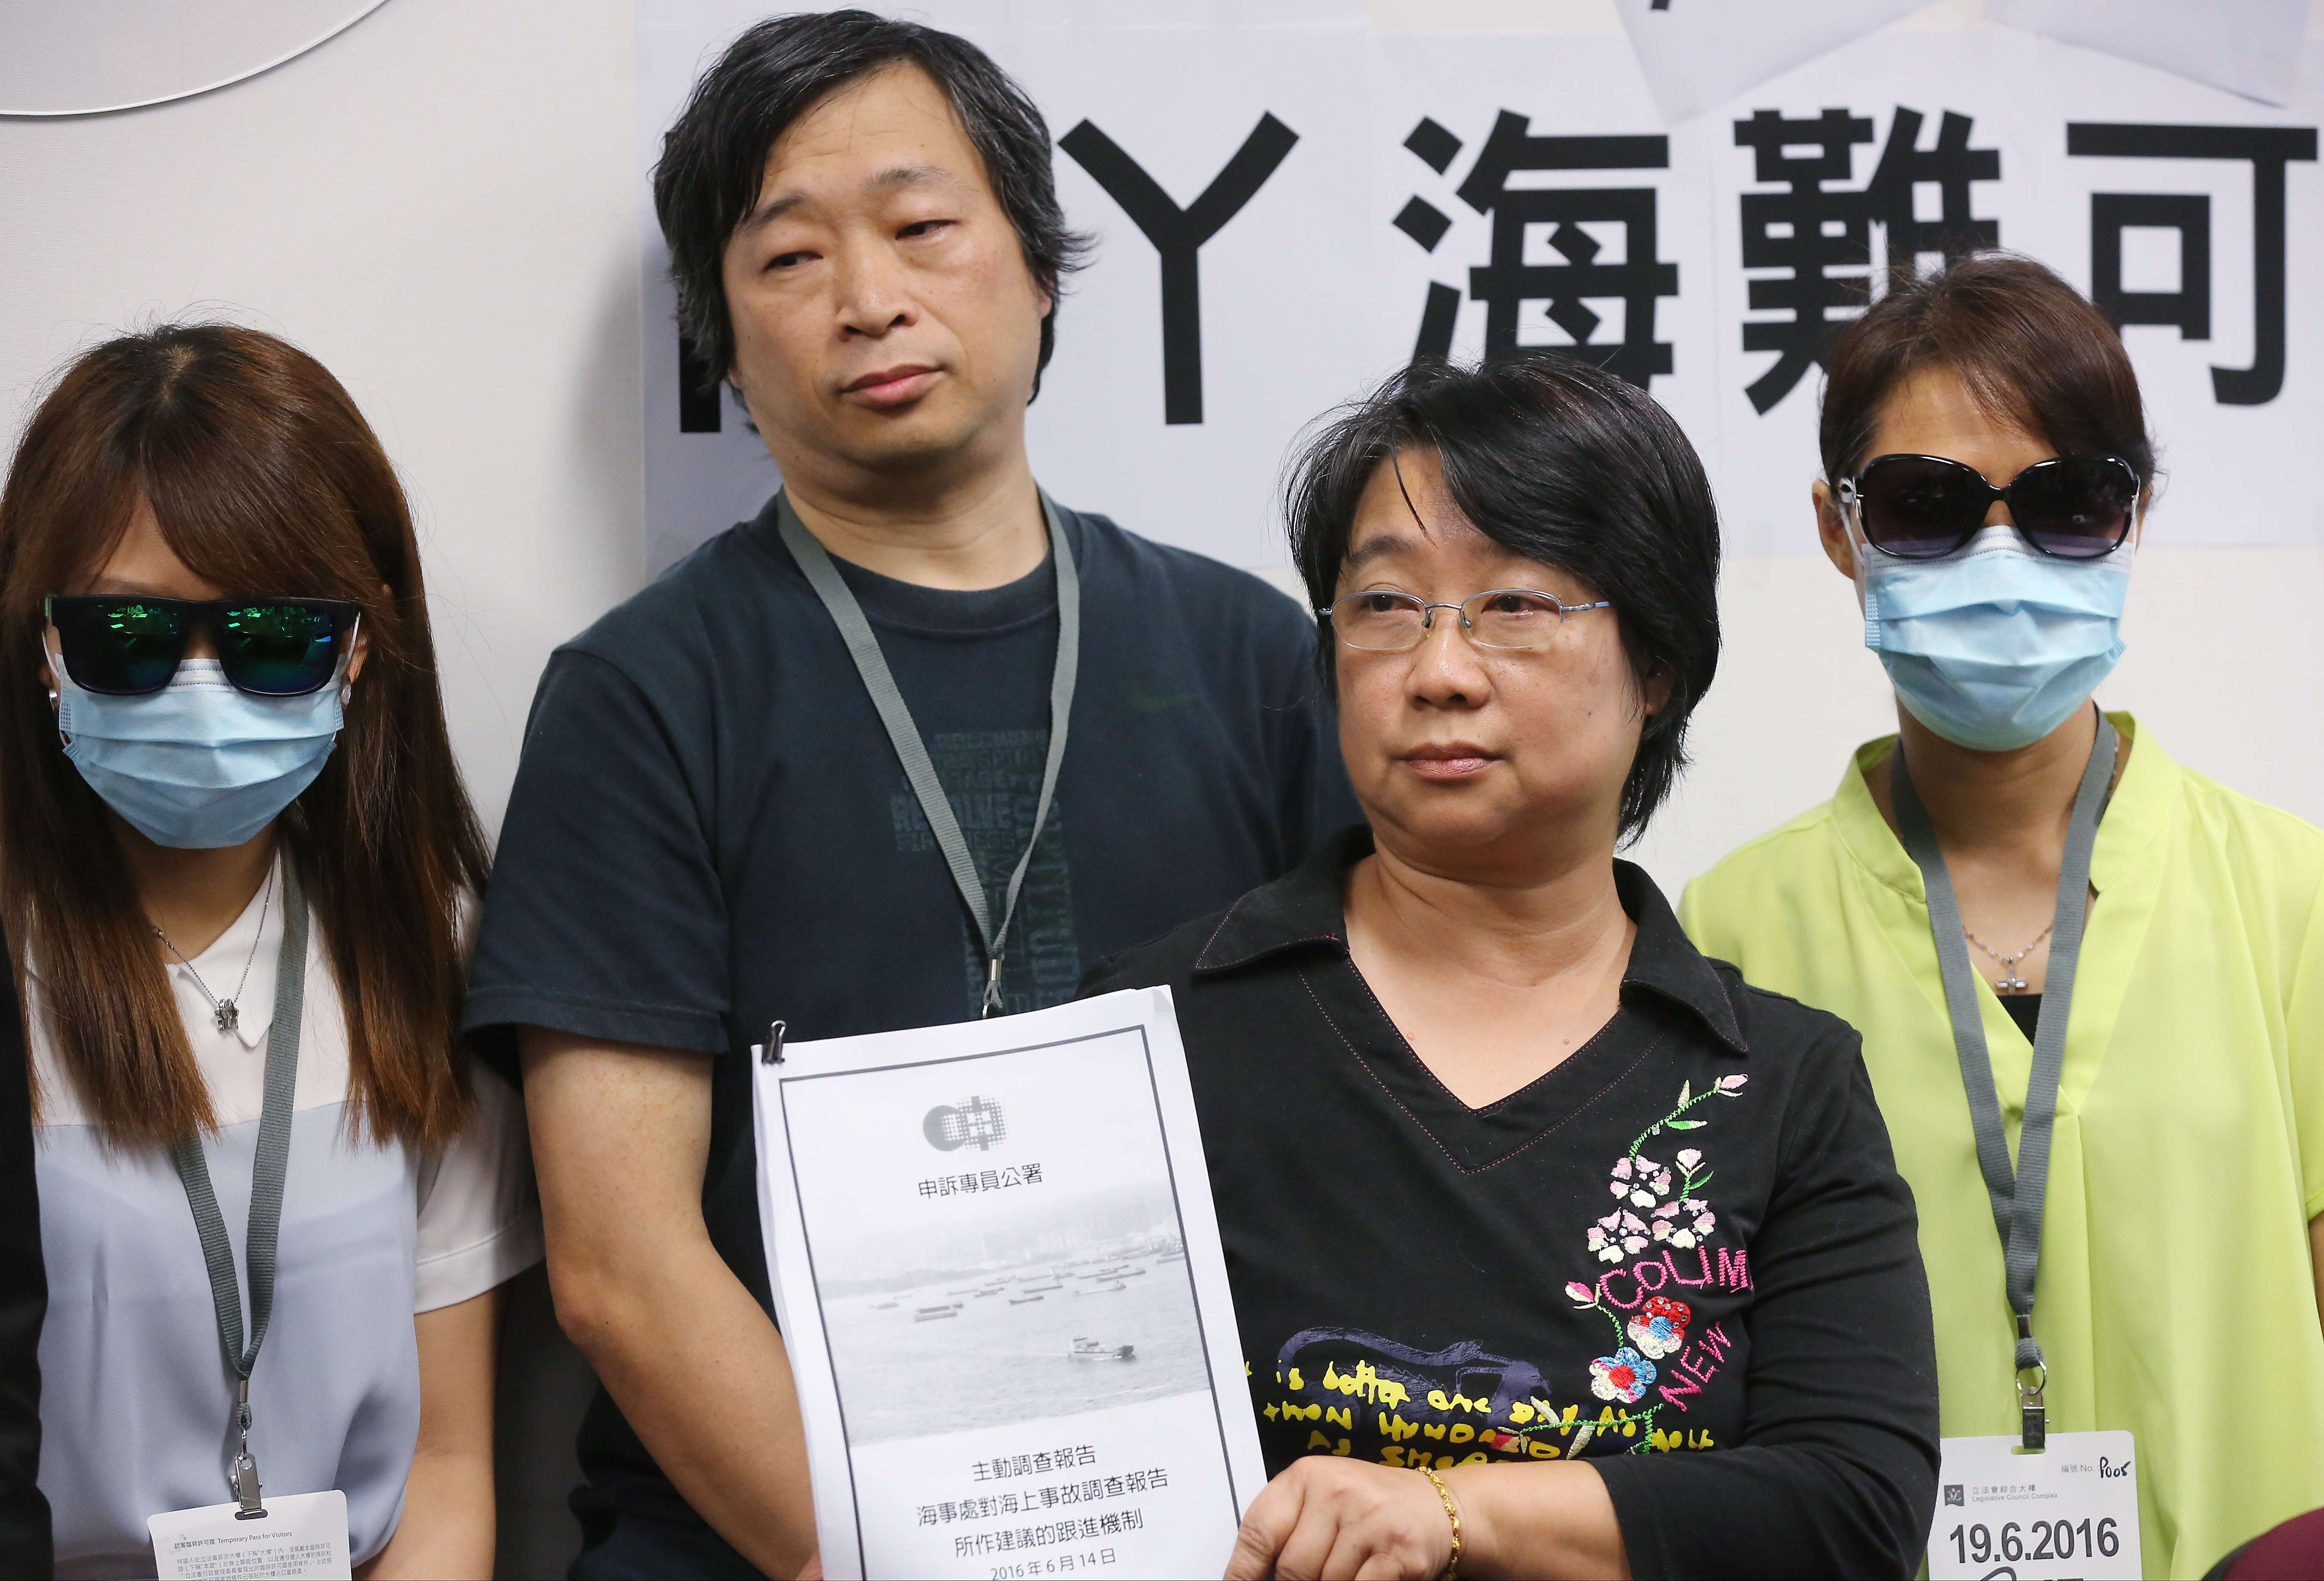 Families of victims in the Lamma ferry tragedy including Irene Koo (second from right) at Legco on Sunday. Photo: Edward Wong